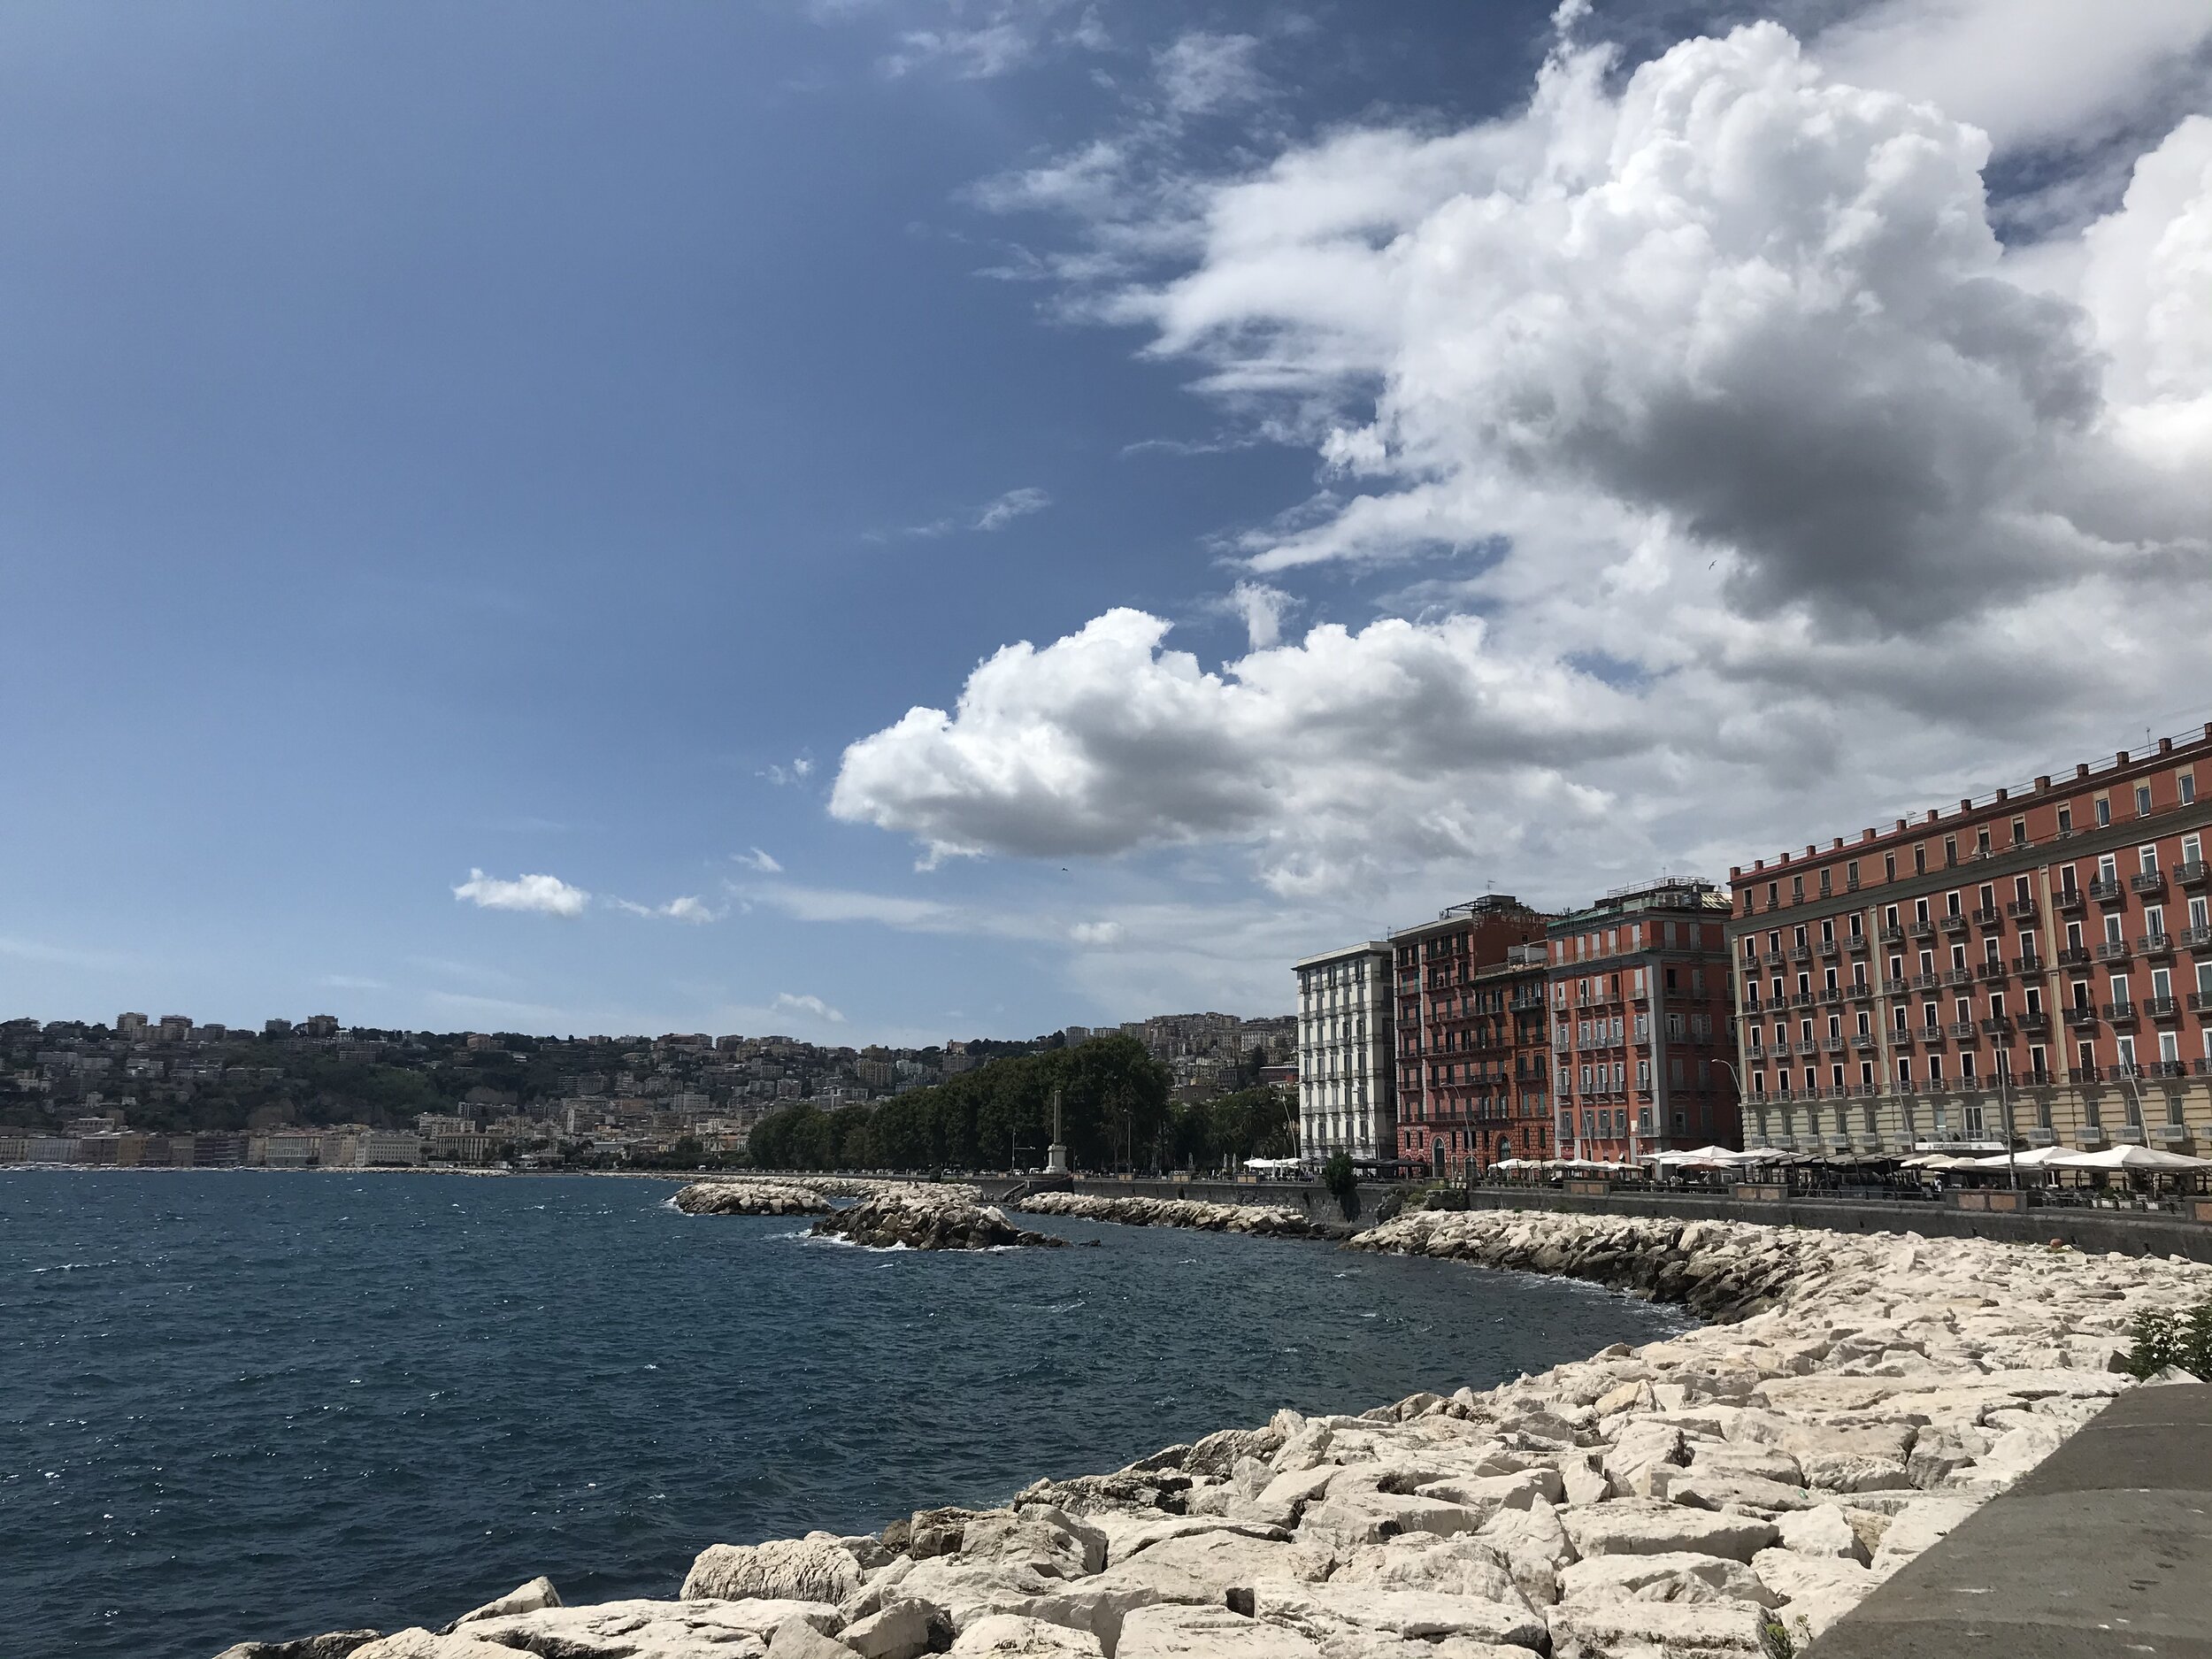 NAPLES, Italy. August 7th, 2020. PICTURED: A view down Lungo Mare from Castel dell’Ovo towards the monument to the fallen, as well as two wonderful pizzerias.